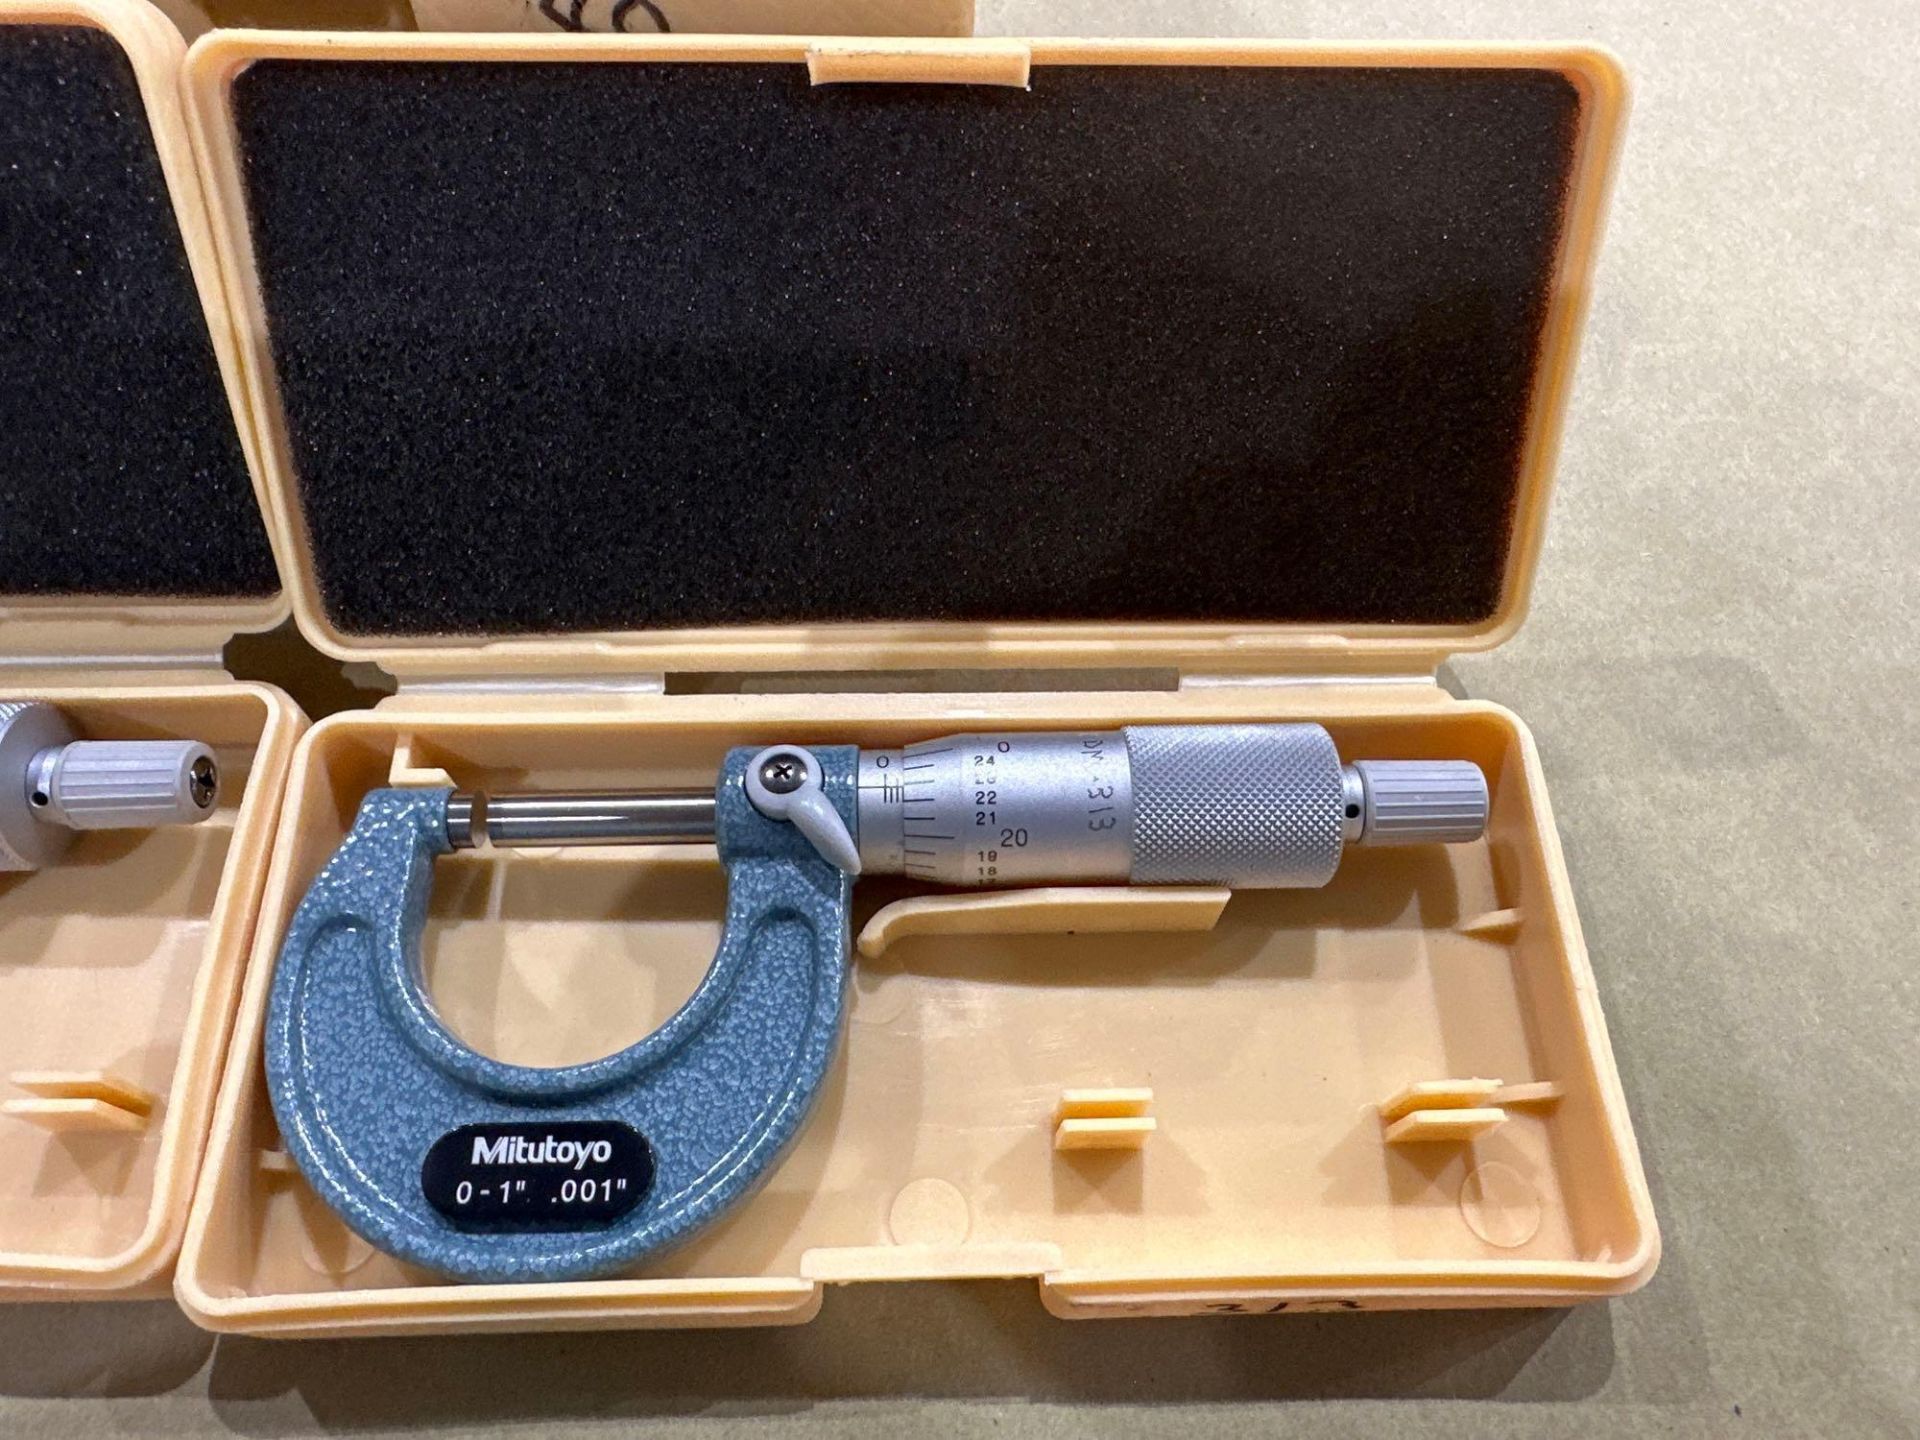 Lot of 12: Mitutoyo Mechanical OD Micrometer M110-1”, 0-1” Range, .001” Graduation, in plastic boxes - Image 5 of 6